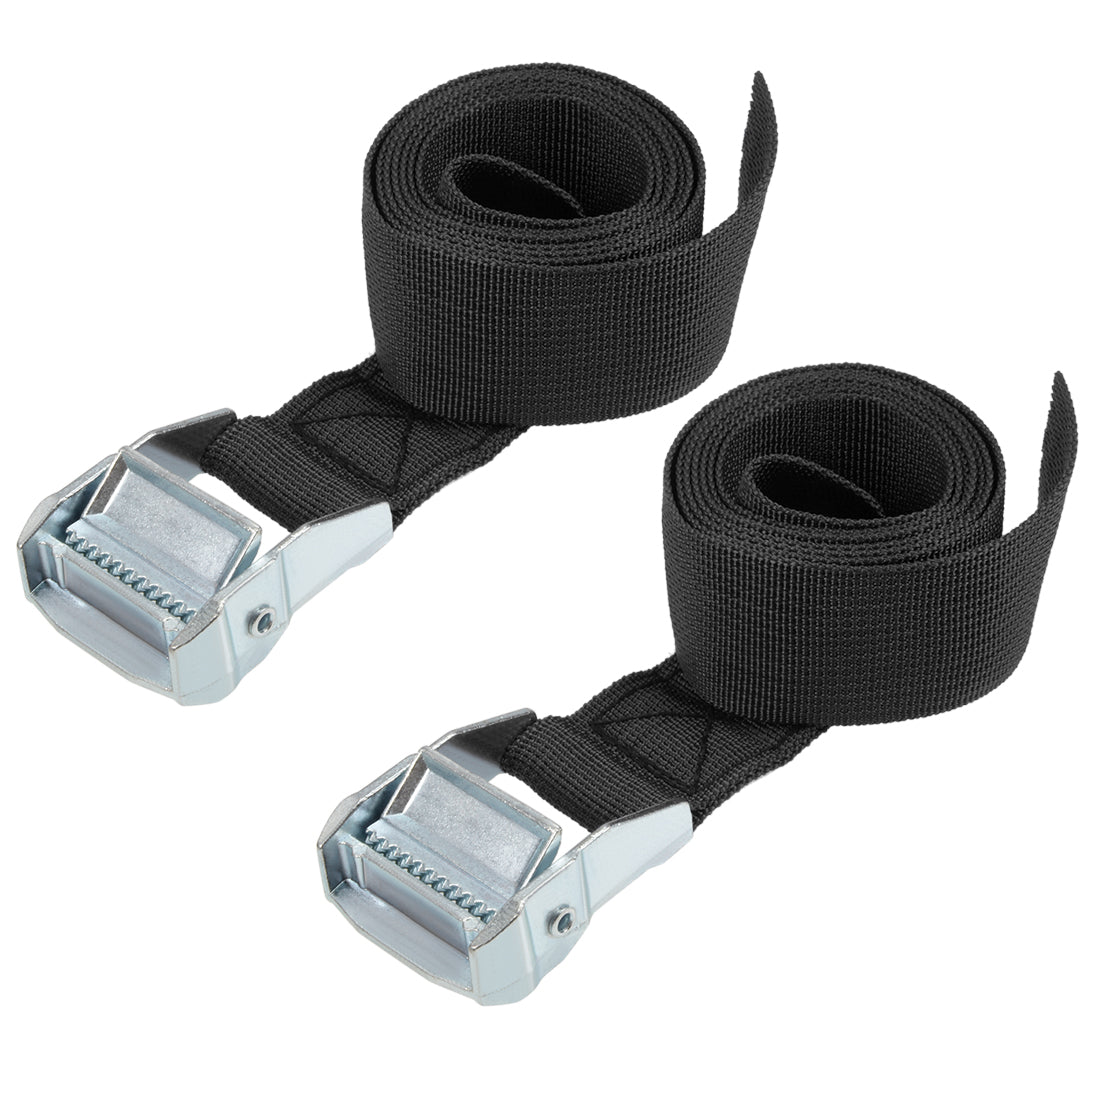 uxcell Uxcell 1.5Mx38mm Lashing Strap Cargo Tie Down Straps w Cam Lock Buckle 500Kg Work Load, Black, 2Pcs